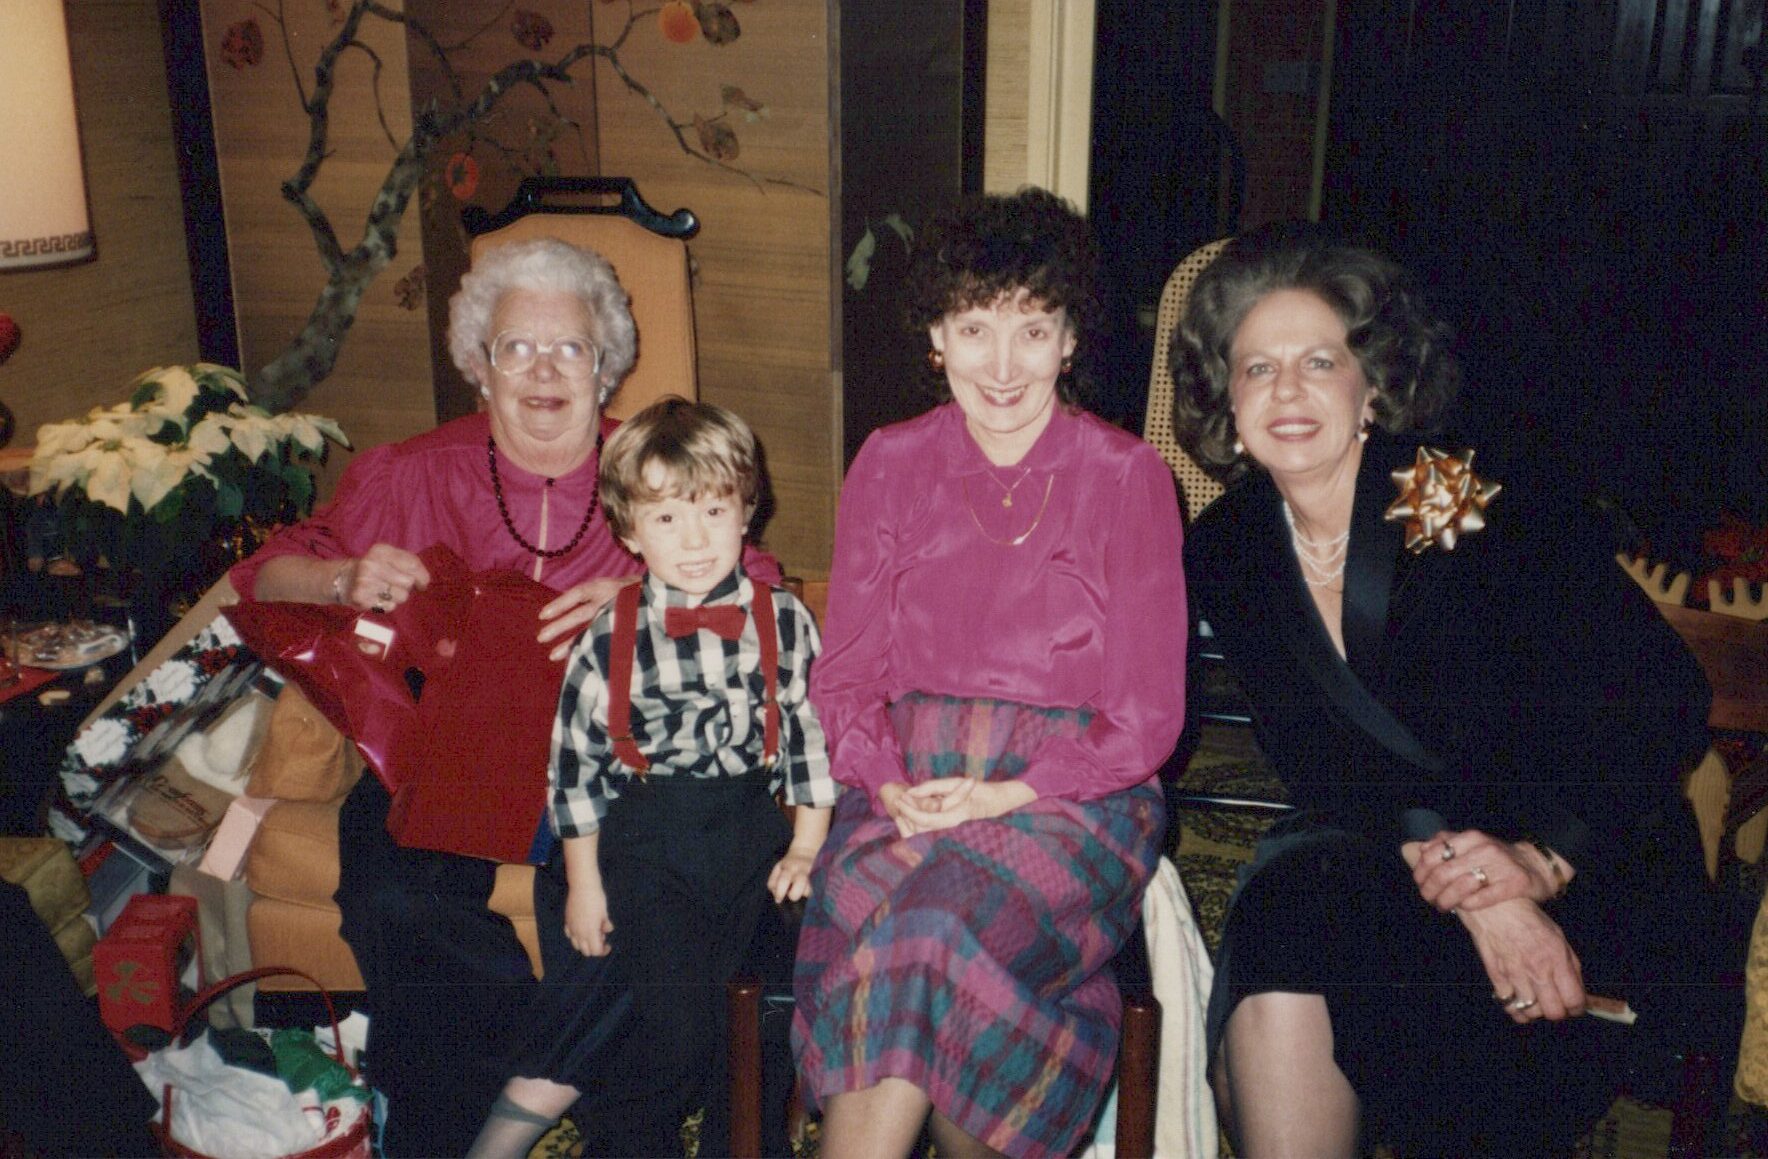 Photo of grandma, daughters and great grandson on Christmas Eve 1987.